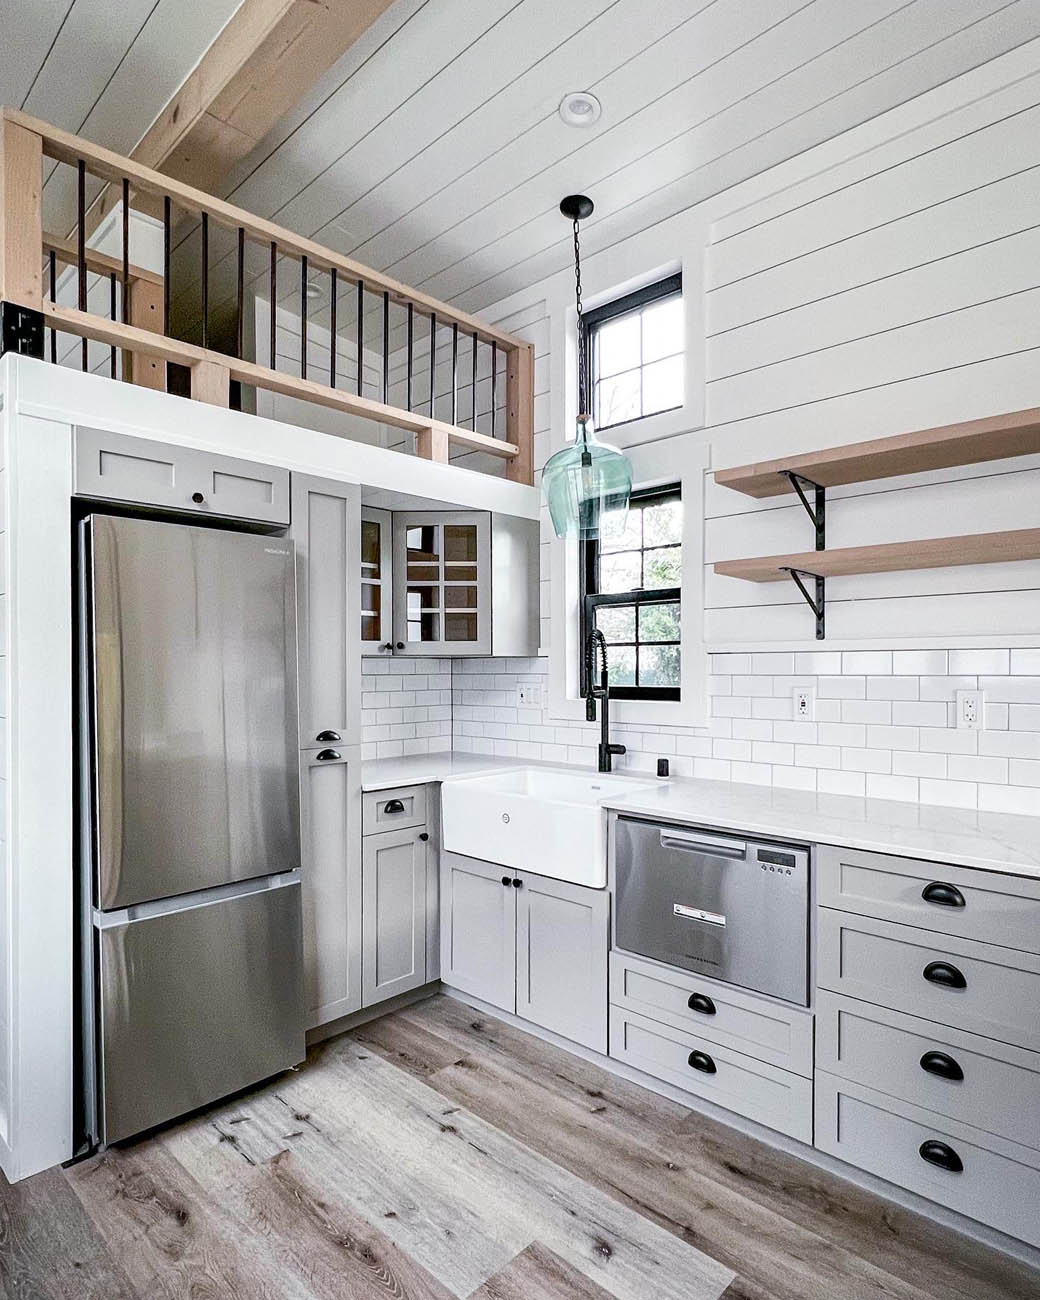 A Anchored Tiny Homes modern tiny home, build by our custom small home builder in Boise.